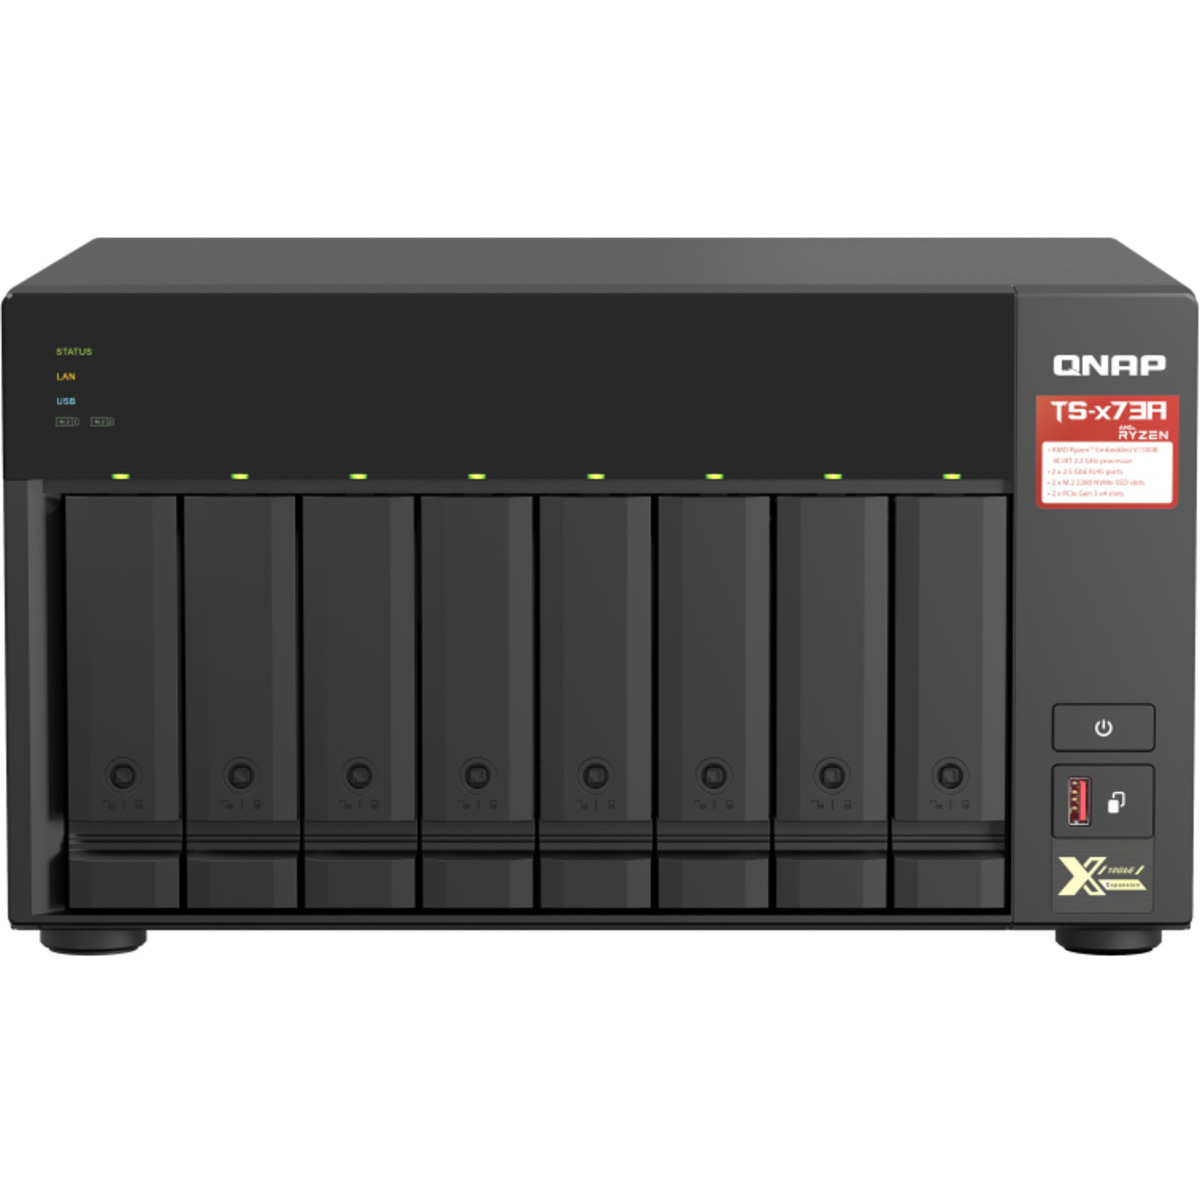 buy $2628 QNAP TS-873A 48tb Desktop NAS - Network Attached Storage Device 8x6000gb Western Digital Blue WD60EZAZ 3.5 5400rpm SATA 6Gb/s HDD CONSUMER Class Drives Installed - Burn-In Tested - nas headquarters buy network attached storage server device das new raid-5 free shipping usa christmas new year holiday sale TS-873A